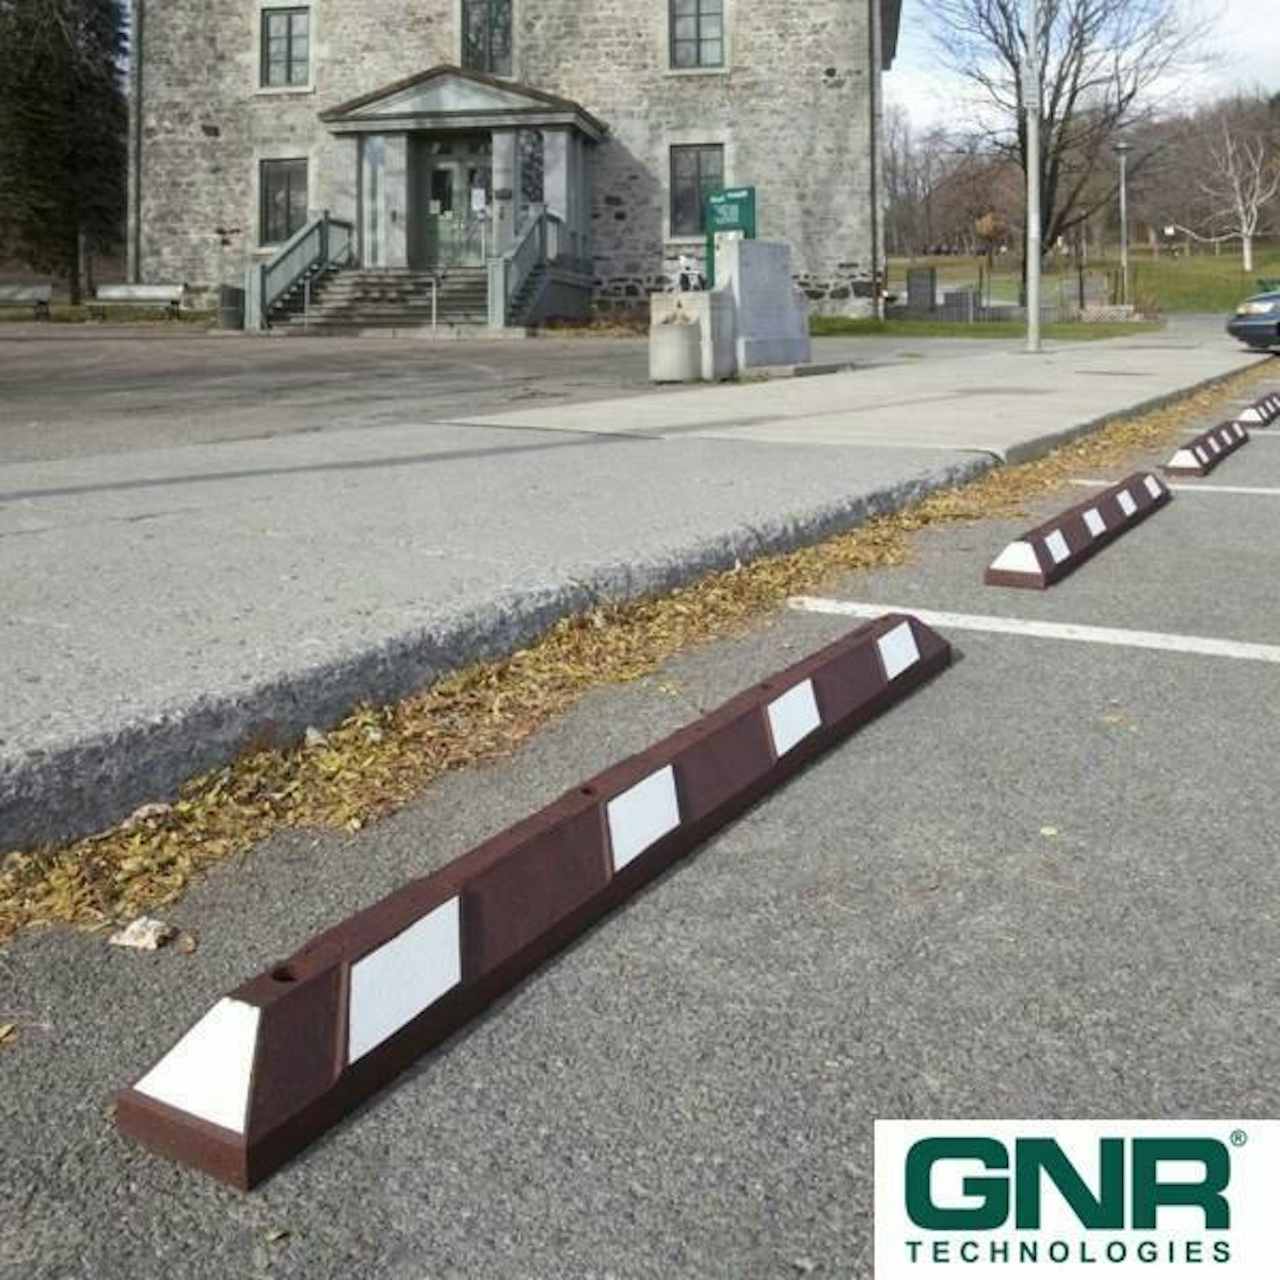 Park It 1800mm Rubber Parking Curb (Red)